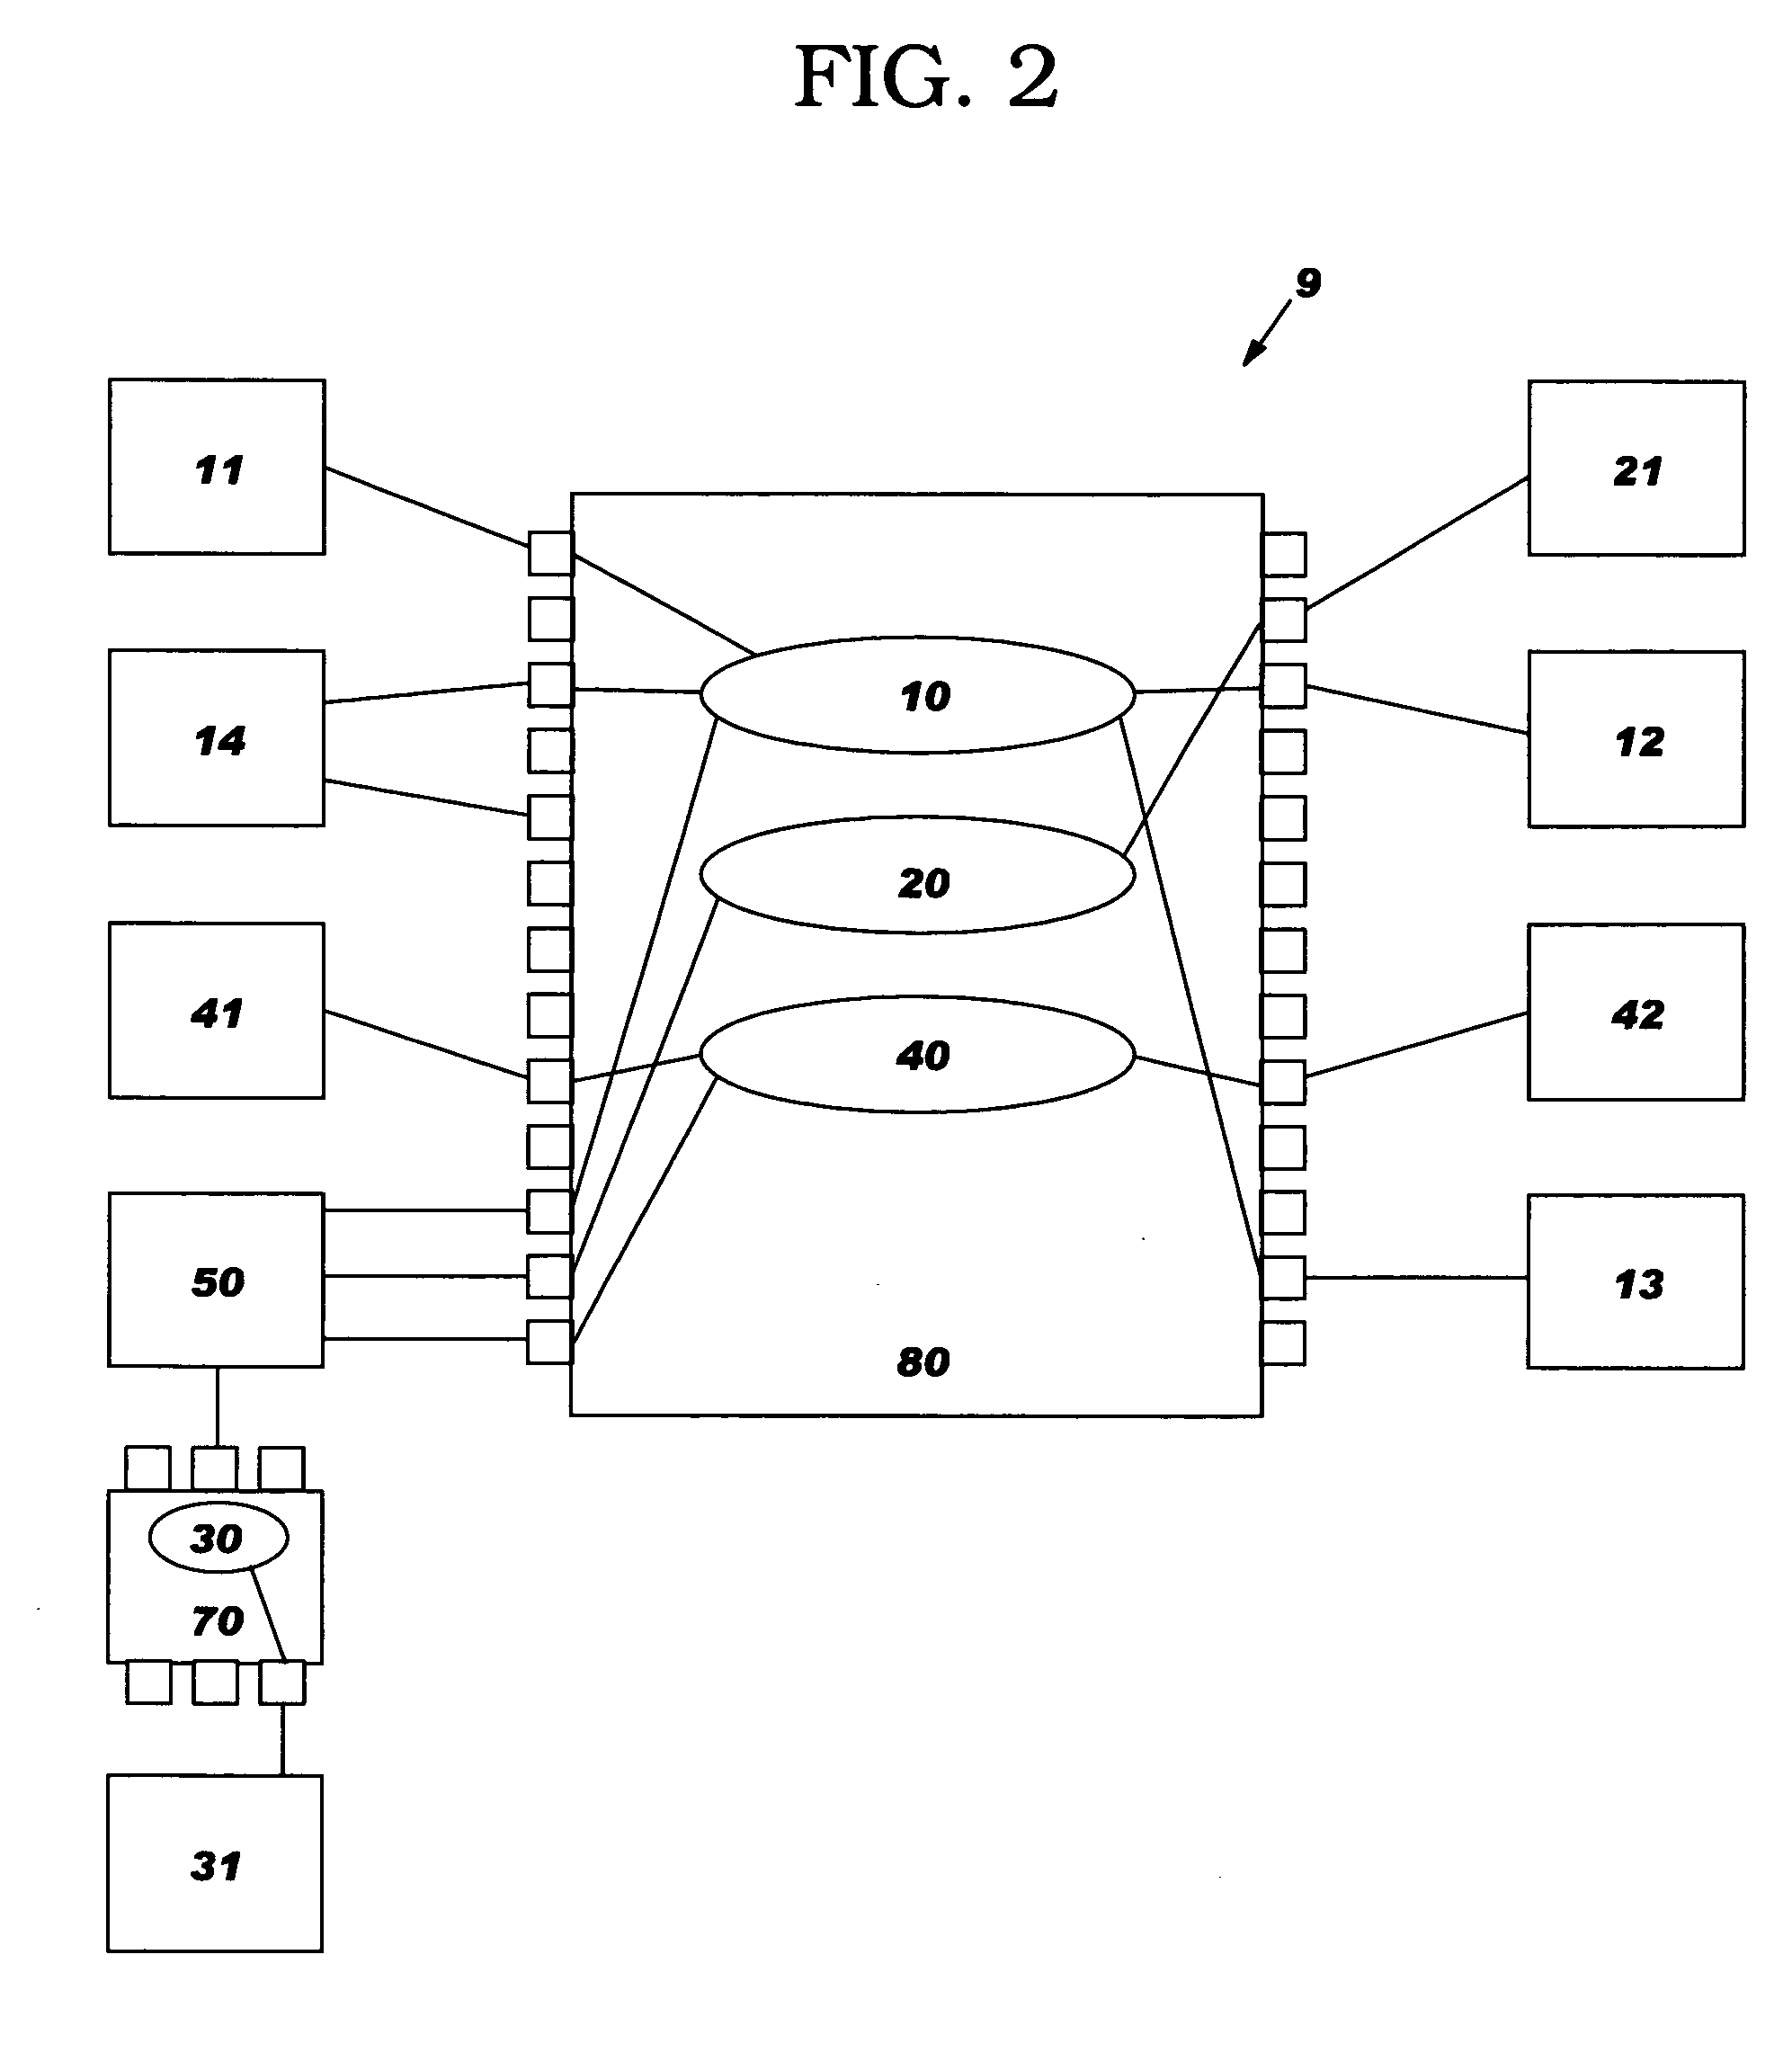 System, method and program product to identify additional firewall rules that may be needed